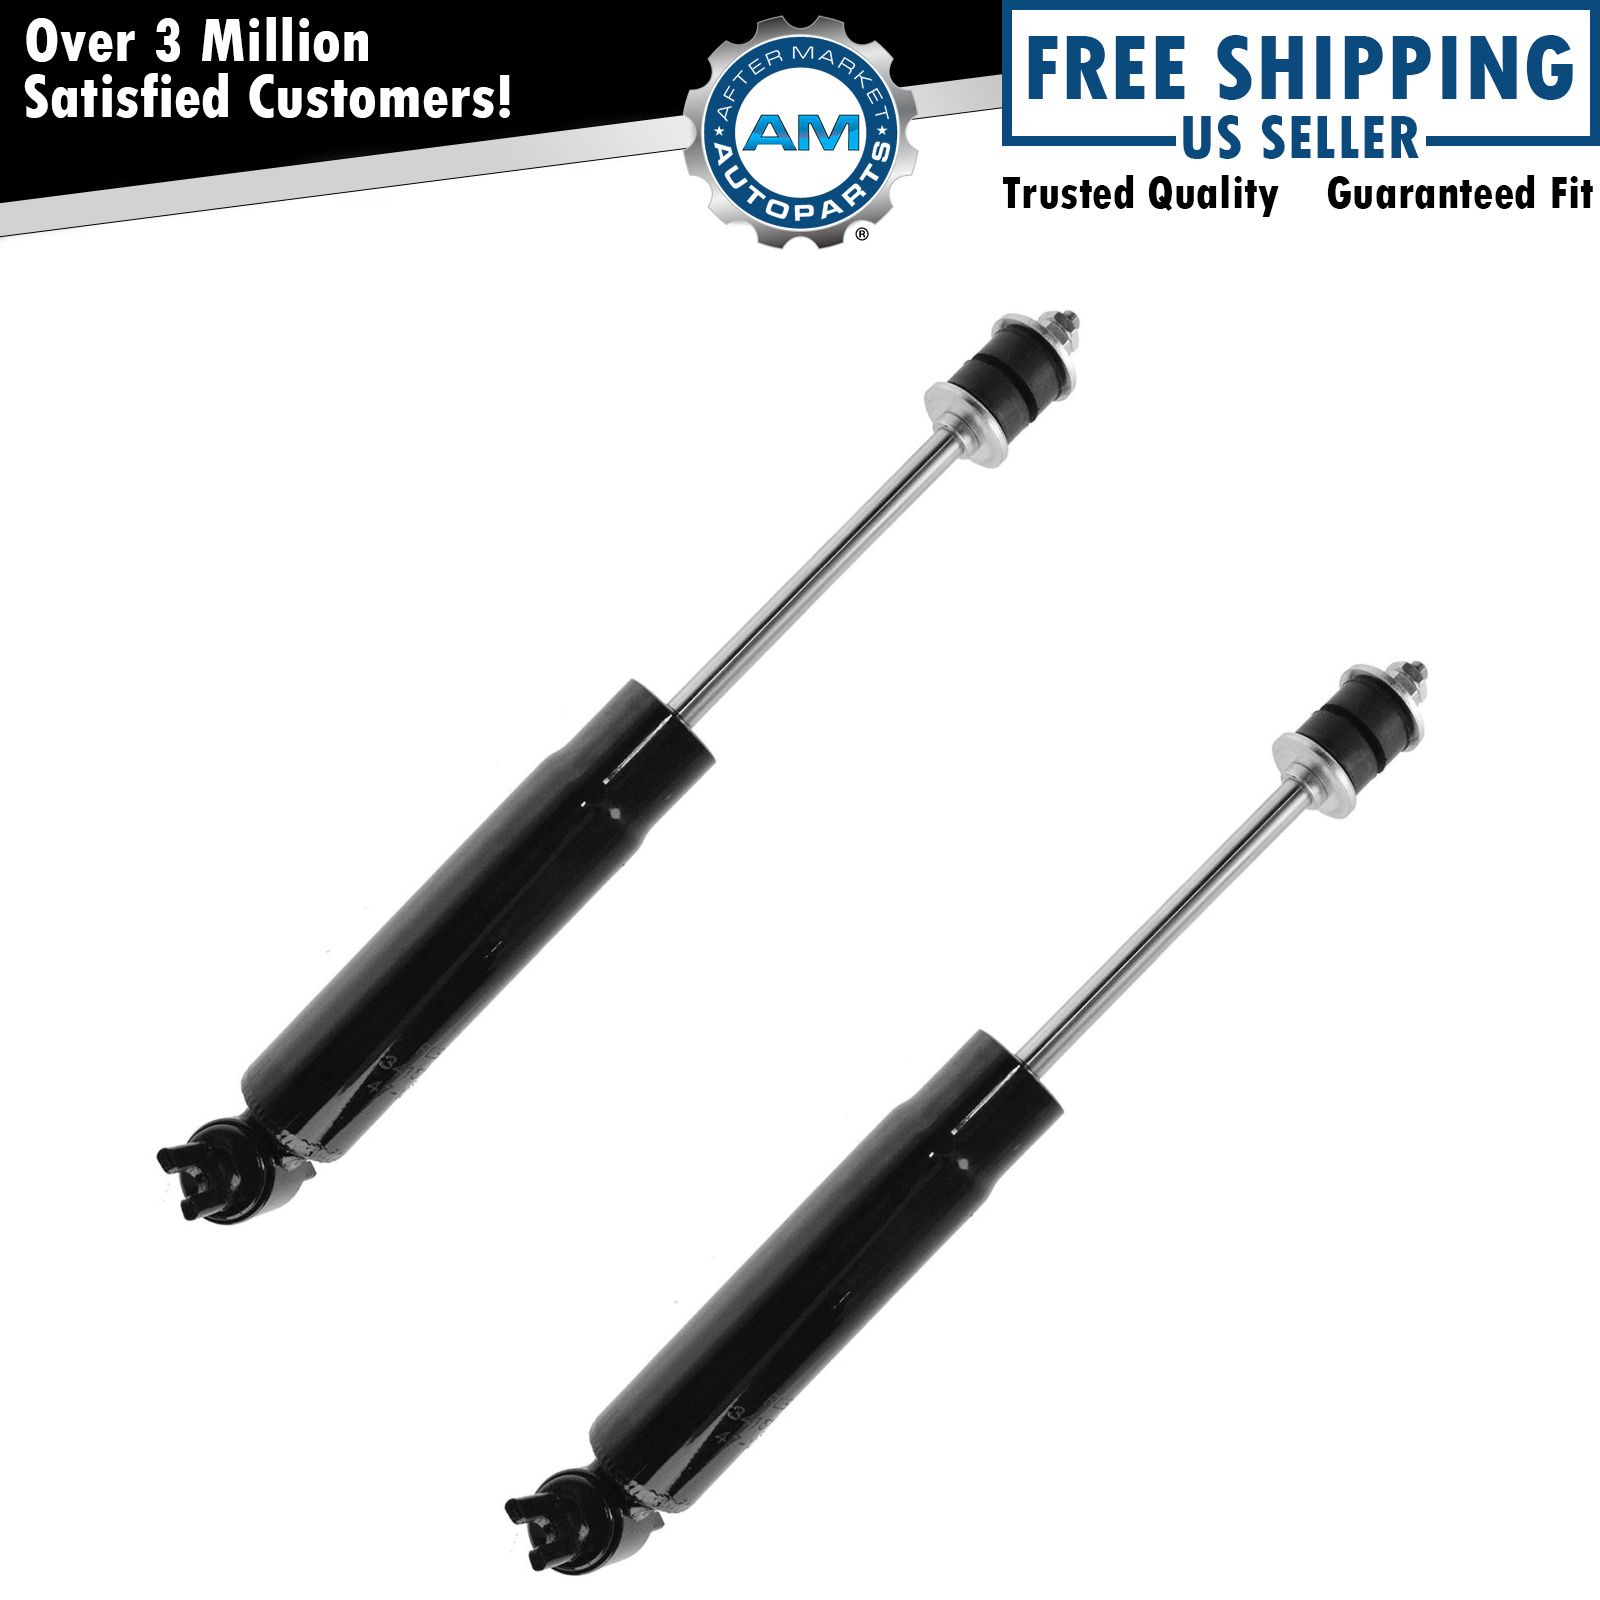 Shock Absorber Front Pair Set for Chevy GMC C1500 C2500 C3500 Tahoe Yukon T100